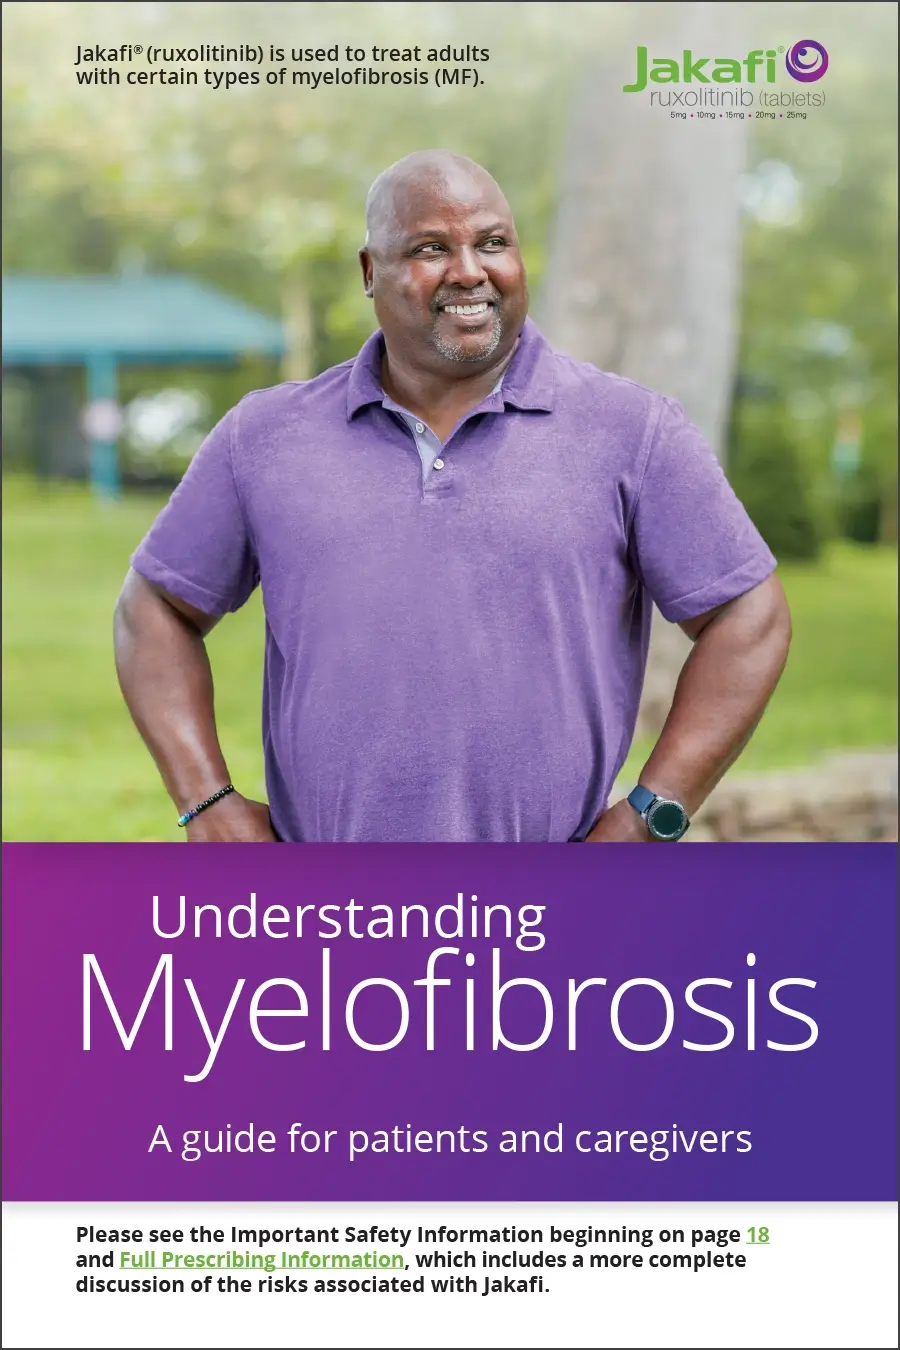 Image of the Understanding Myelofibrosis Guide